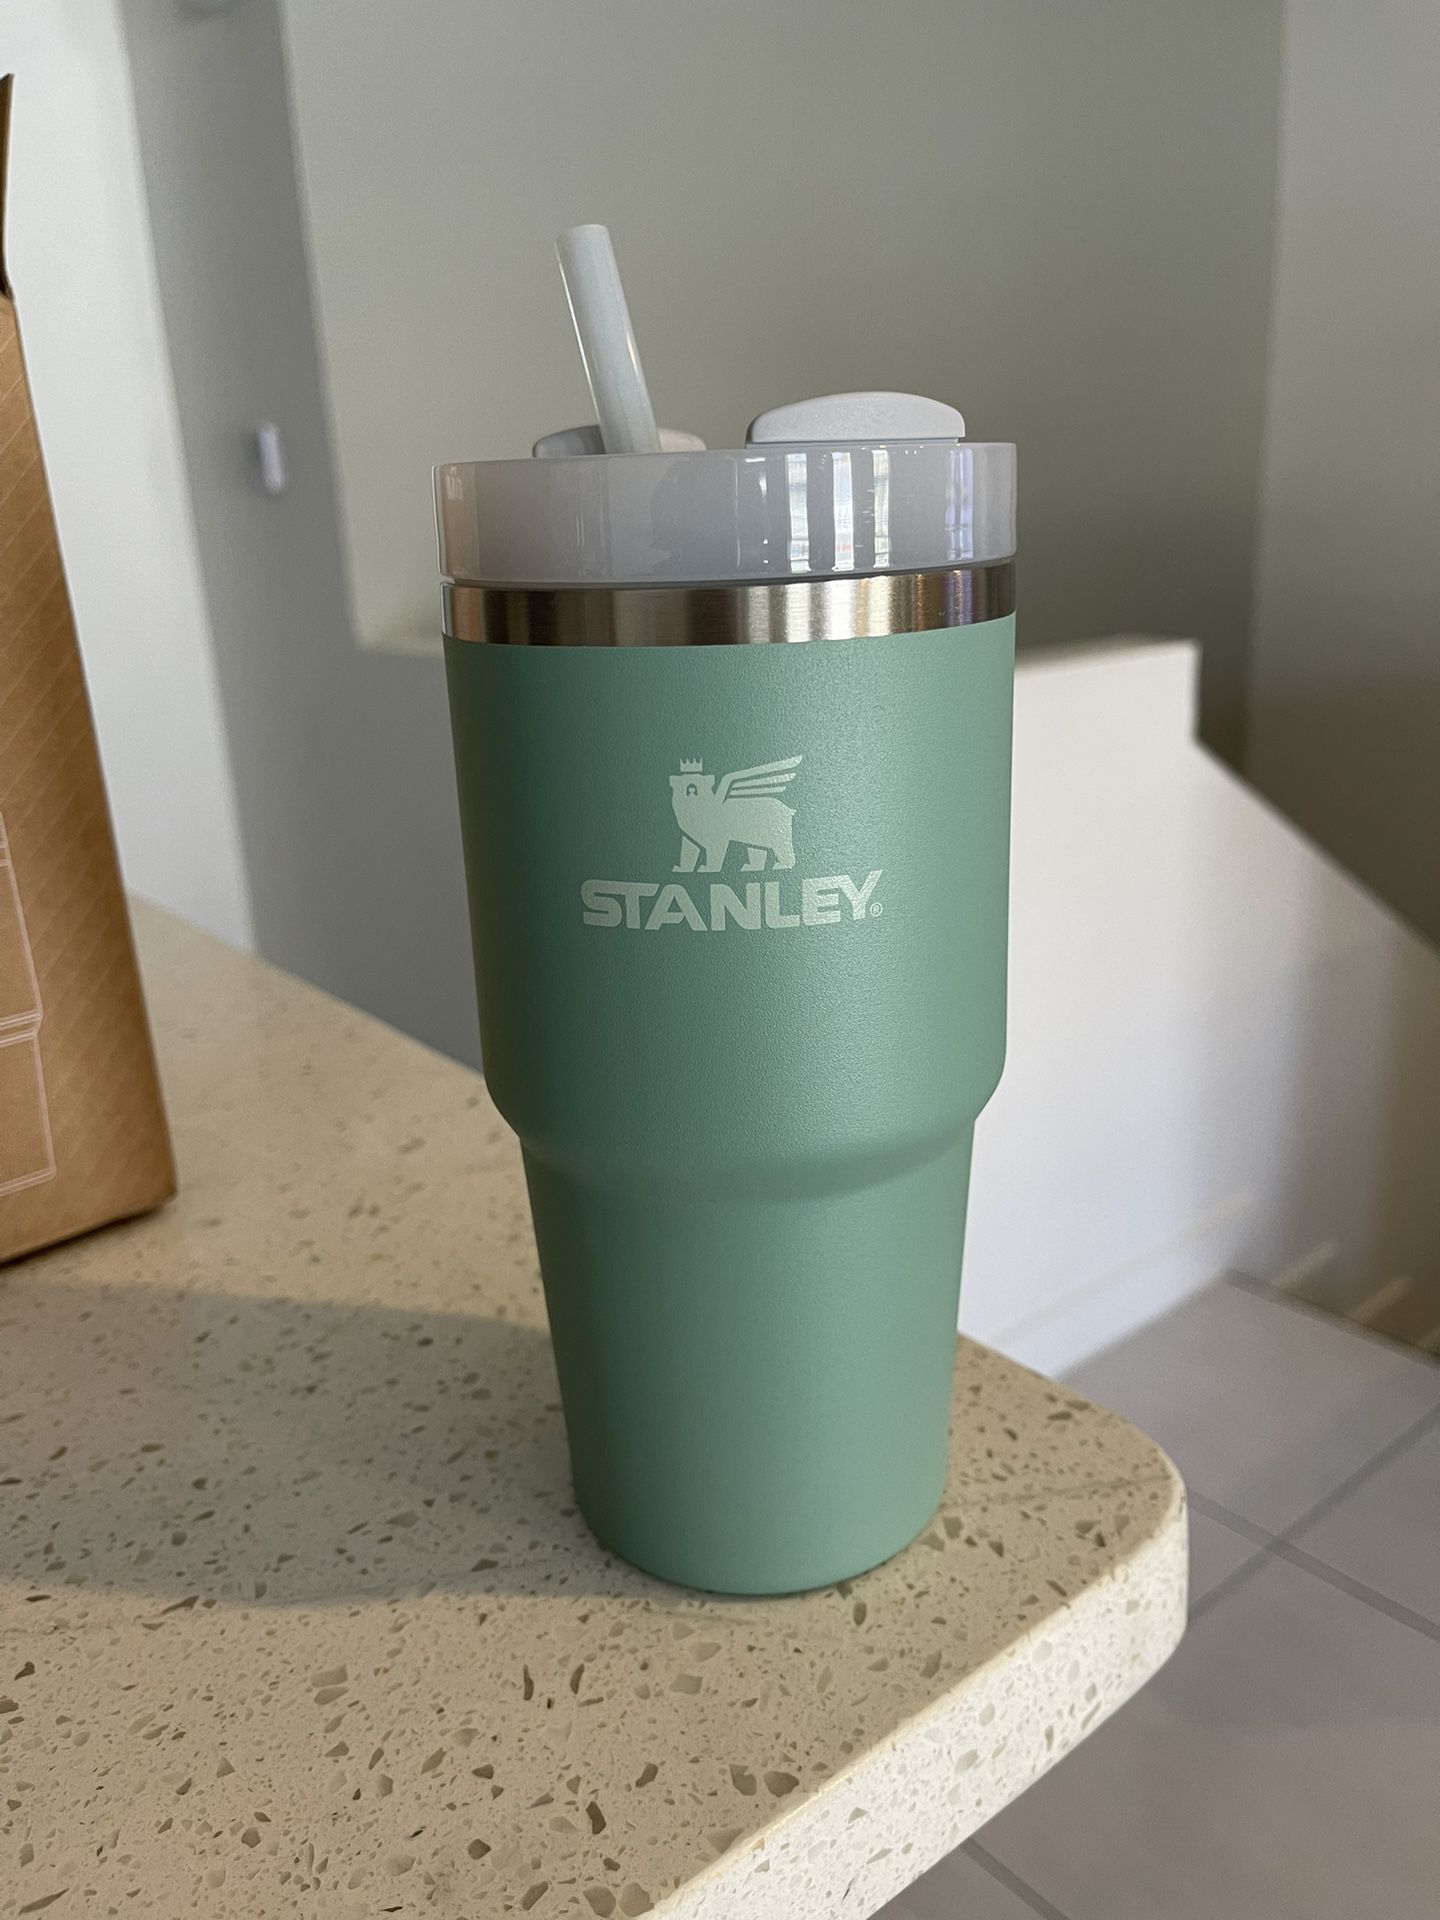 Eucalyptus Stanley Cup for Sale in Houston, TX - OfferUp